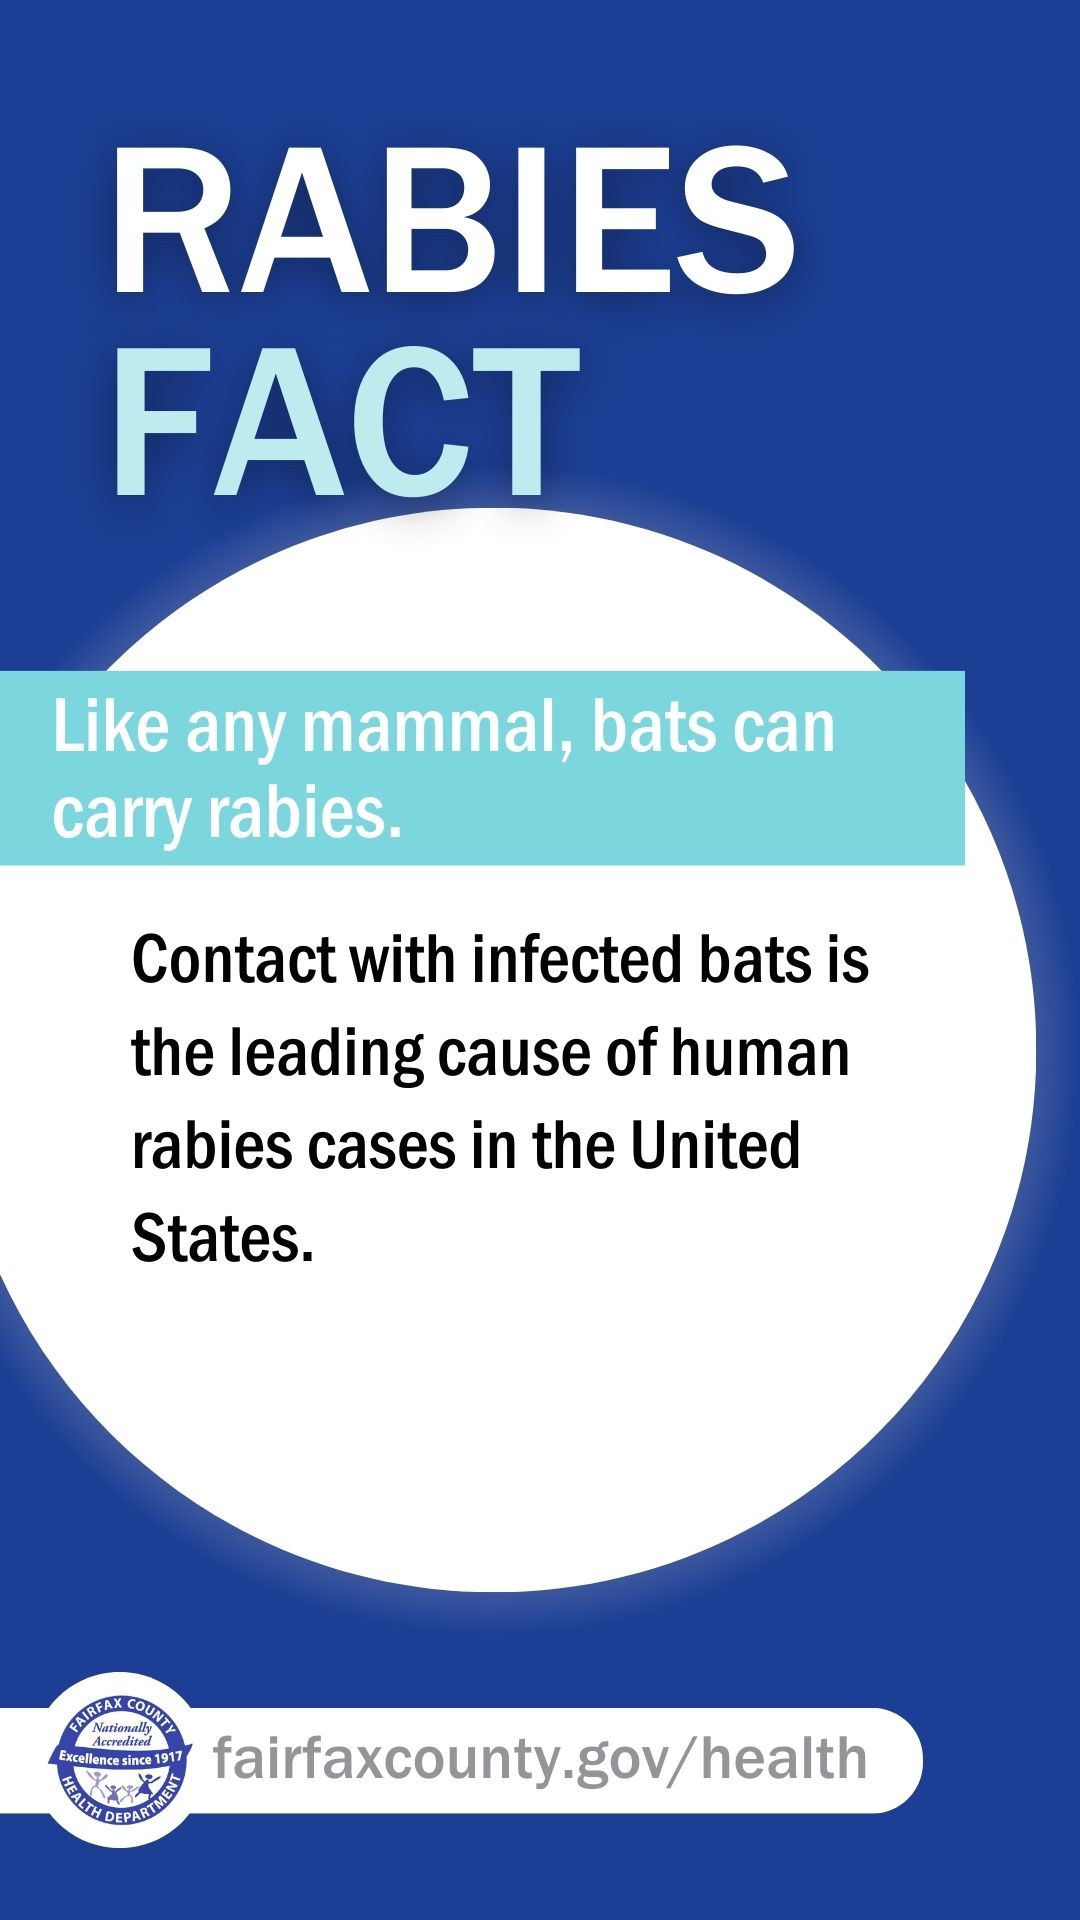 Rabies Fact: Like and mammal, bats can carry rabies. Contact with infected bats is the leading cause of human rabies cases in the United States.